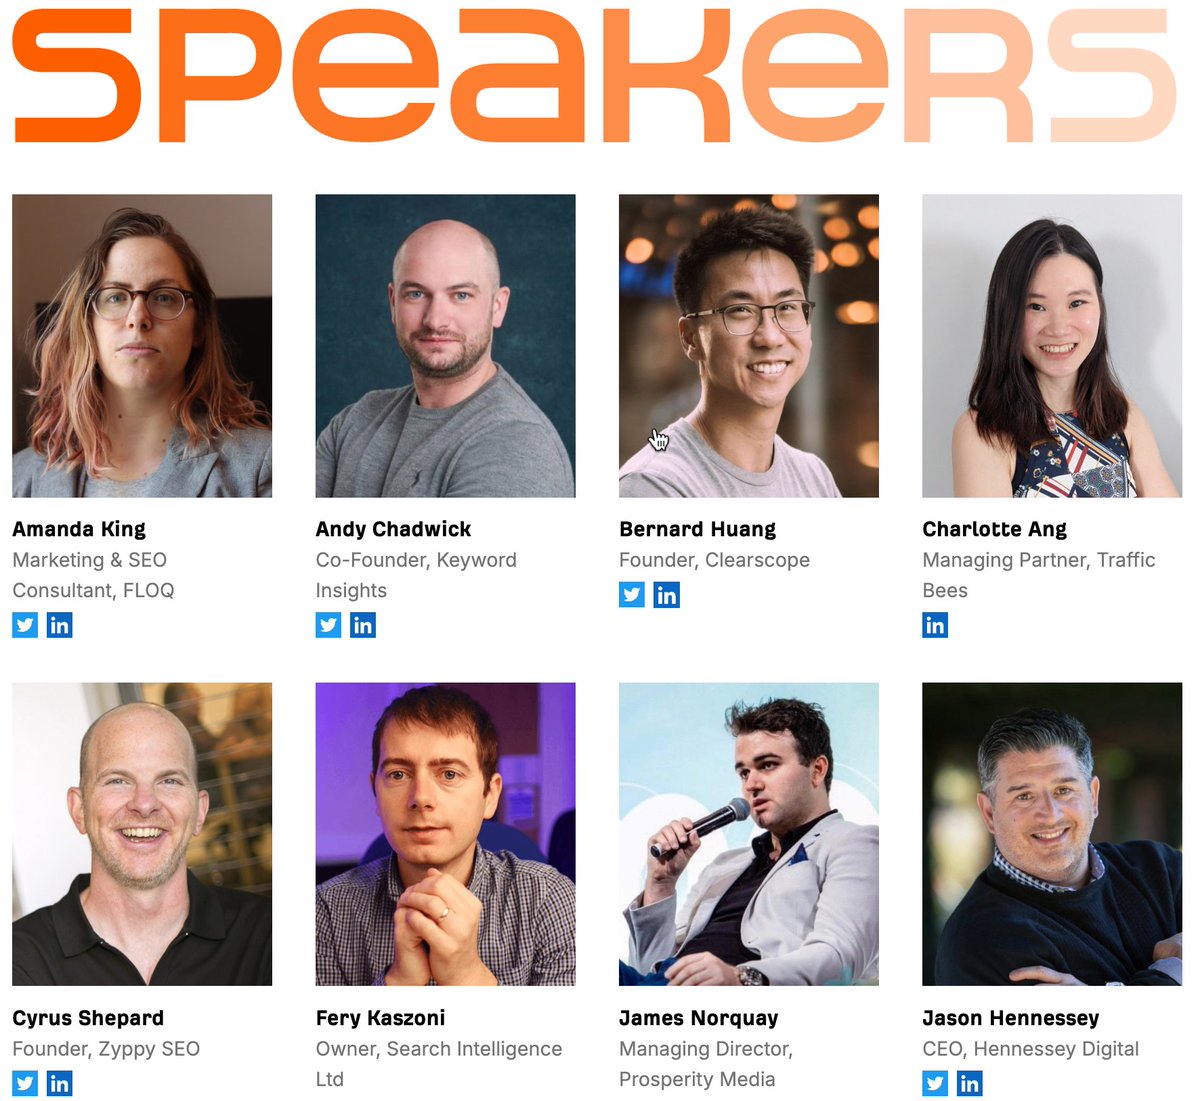 It's happening! 🥳 Ahrefs Evolve Singapore! [24-25 October] ahrefs.com/events/evolve2… We've already confirmed some bad-ass speakers for our event, and that lineup is not even final: 🇦🇺 @amandaecking 🇬🇧 @digitalquokka 🇦🇺 @bernardjhuang 🇺🇸 @CyrusShepard 🇬🇧 @FeryKaszoni 🇦🇺…